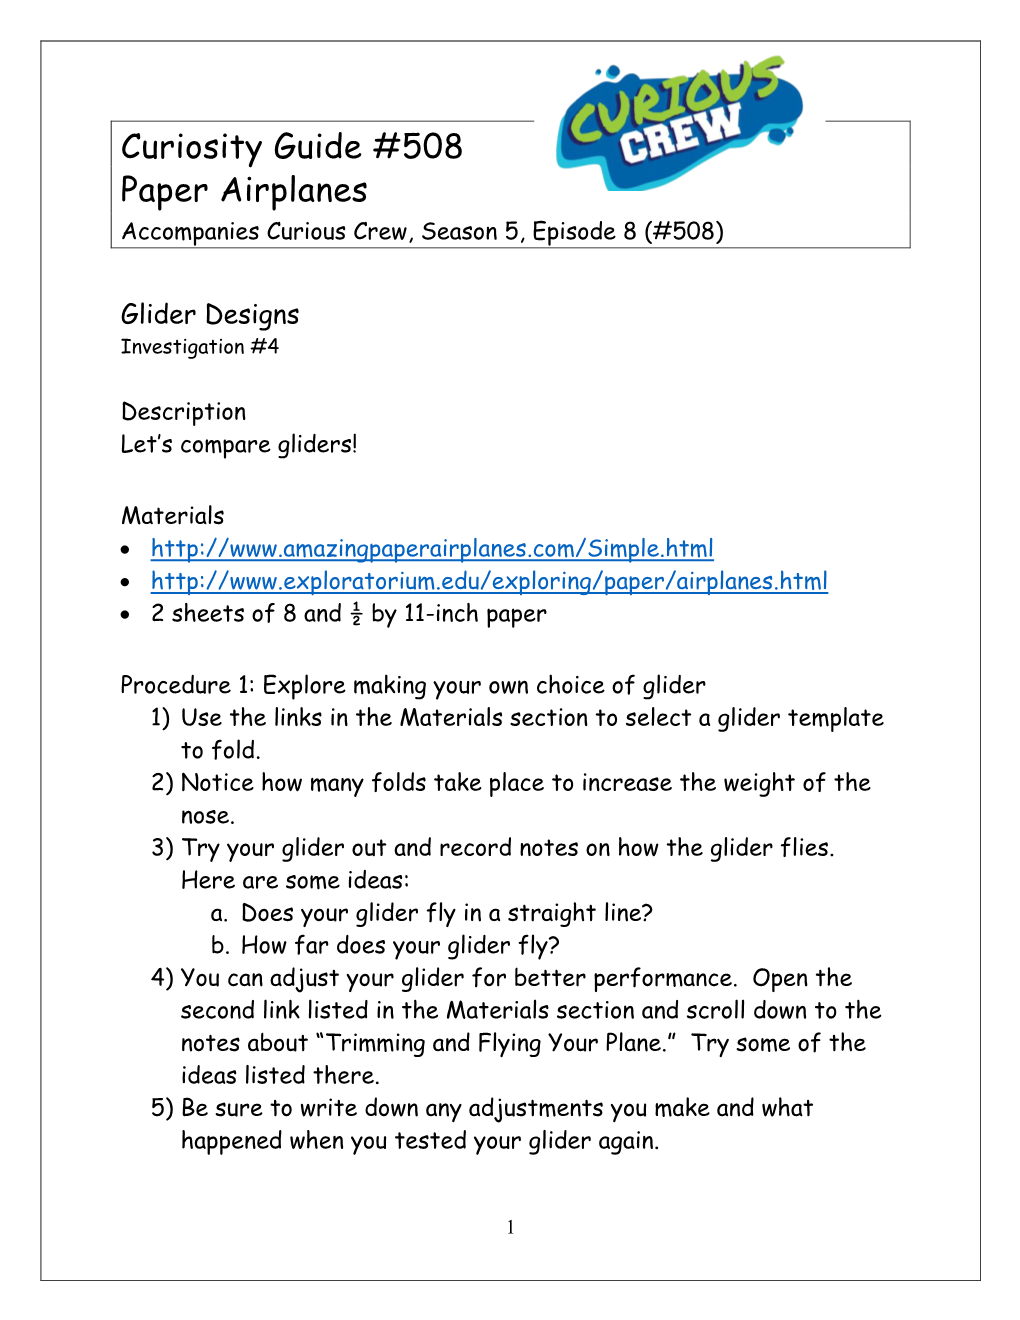 Curiosity Guide #508 Paper Airplanes